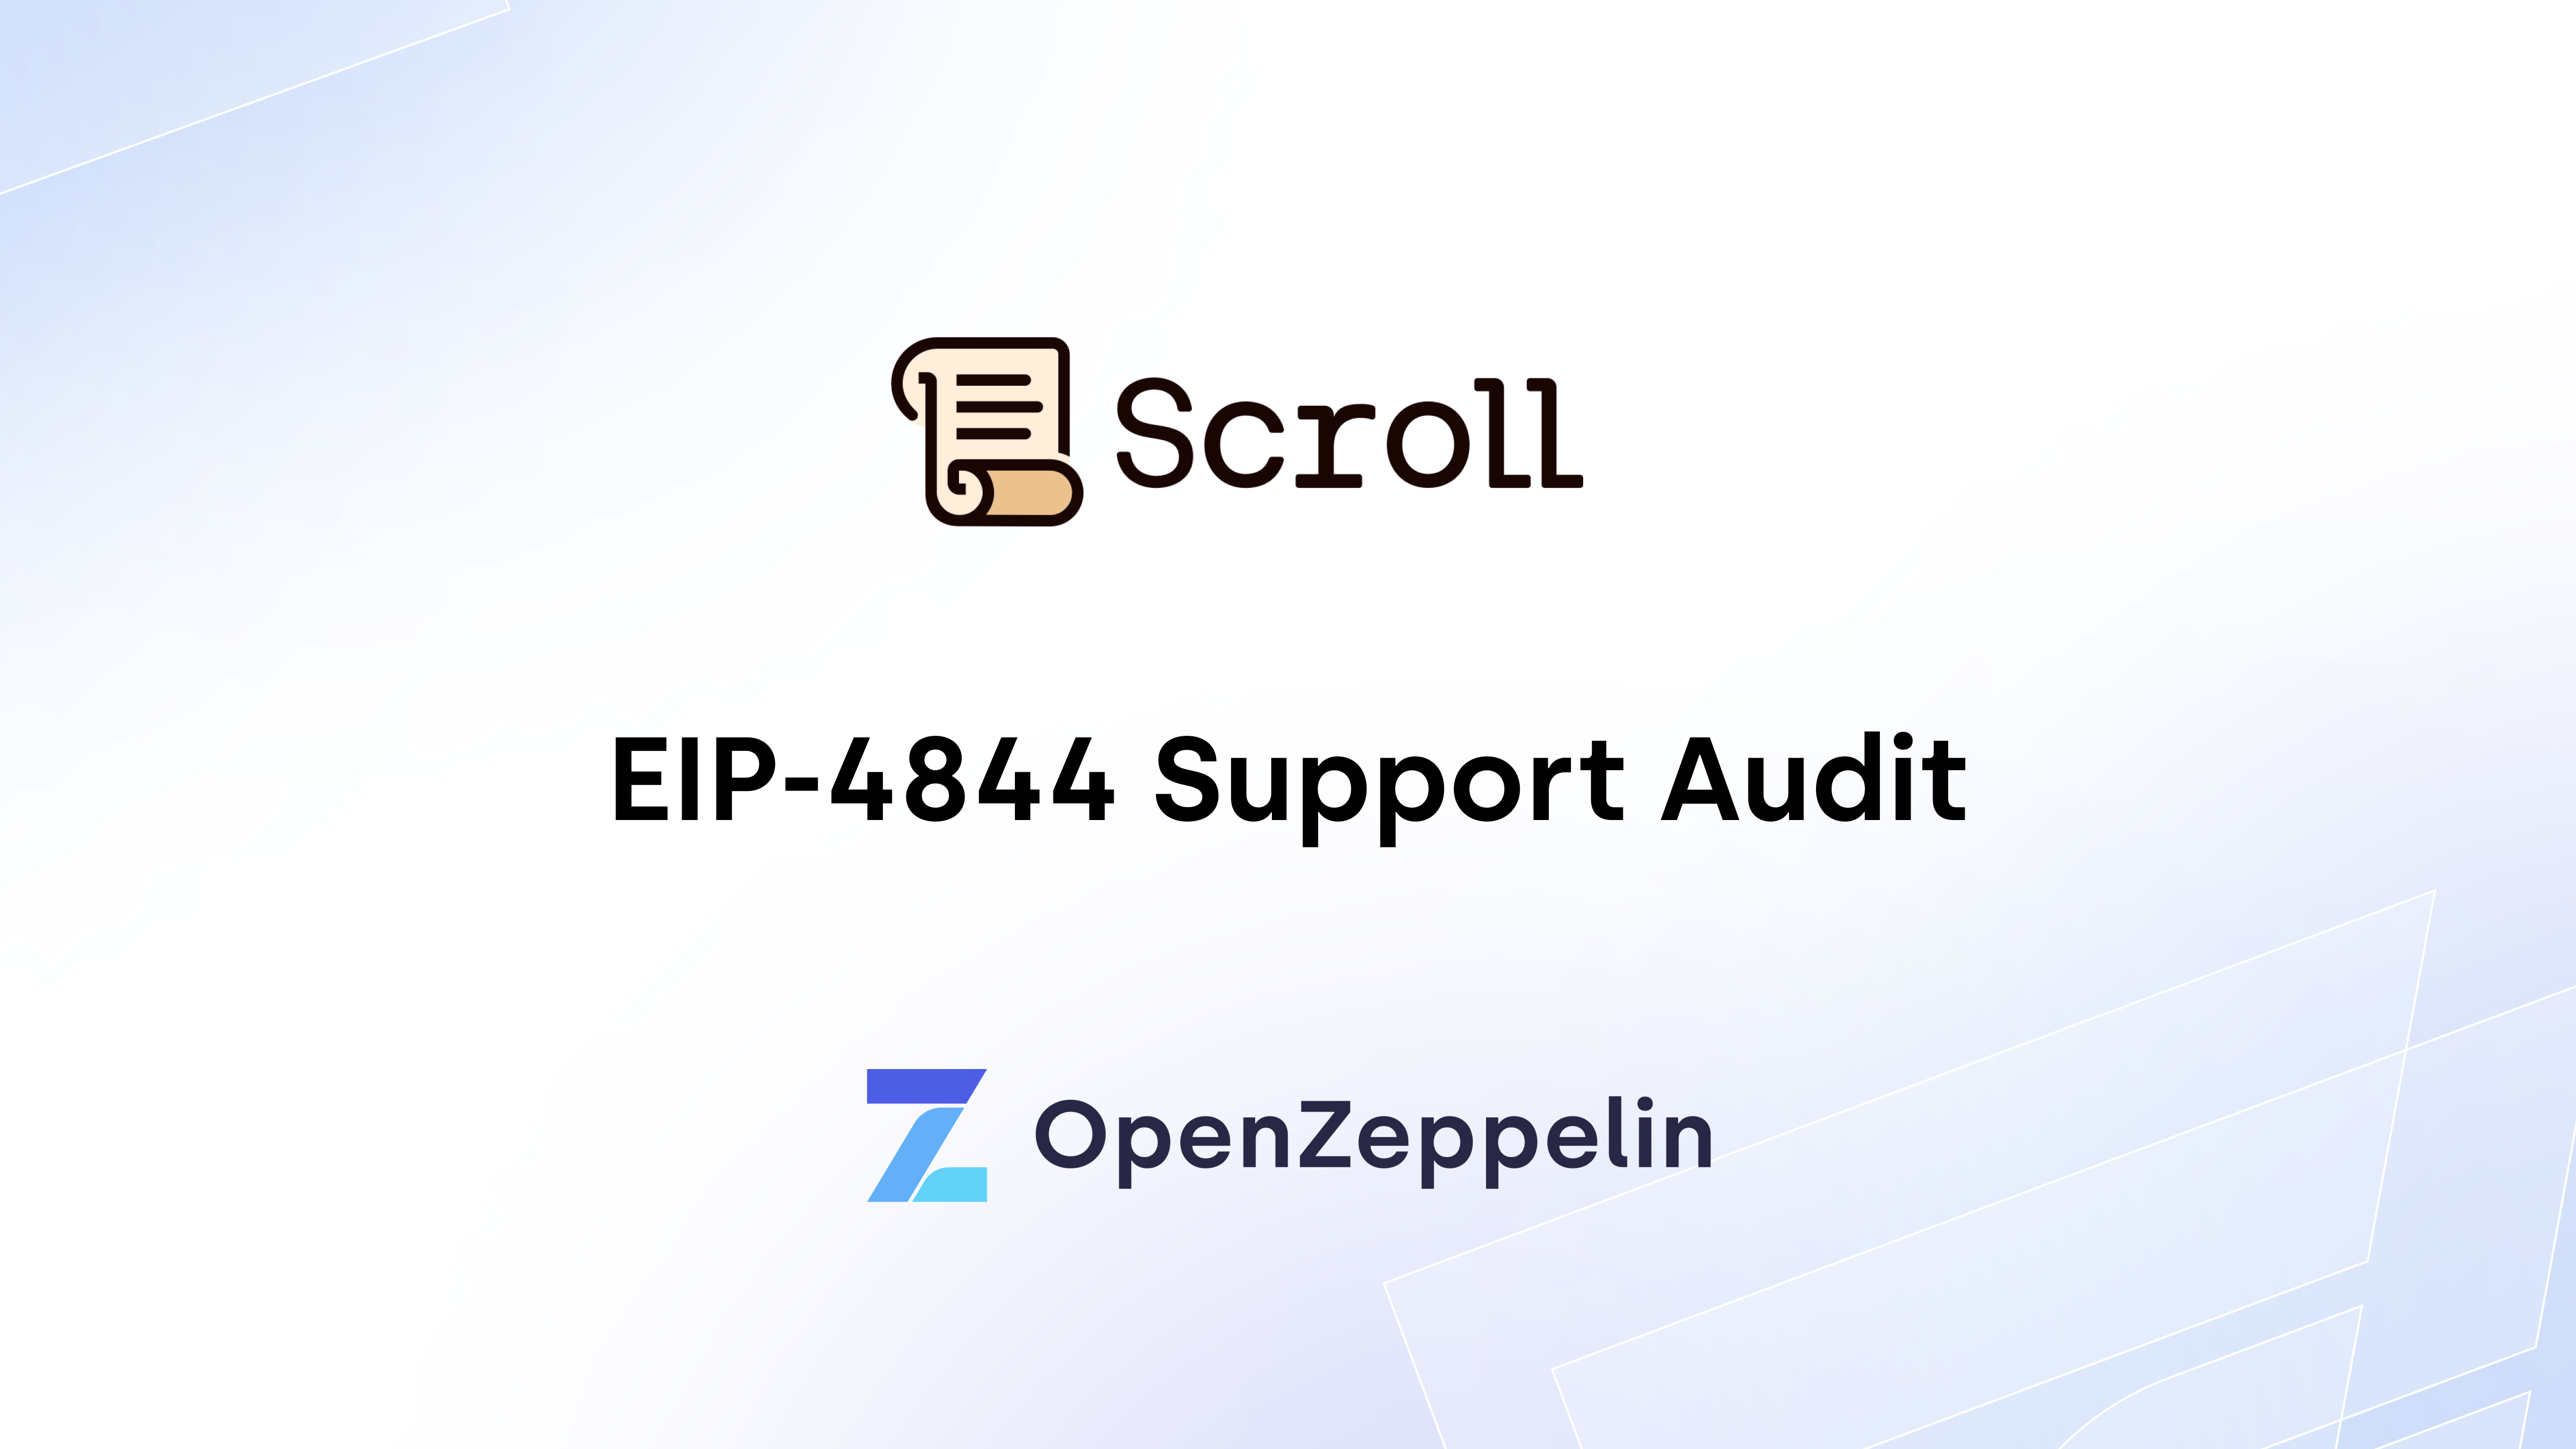 EIP-4844 Support Audit Featured Image